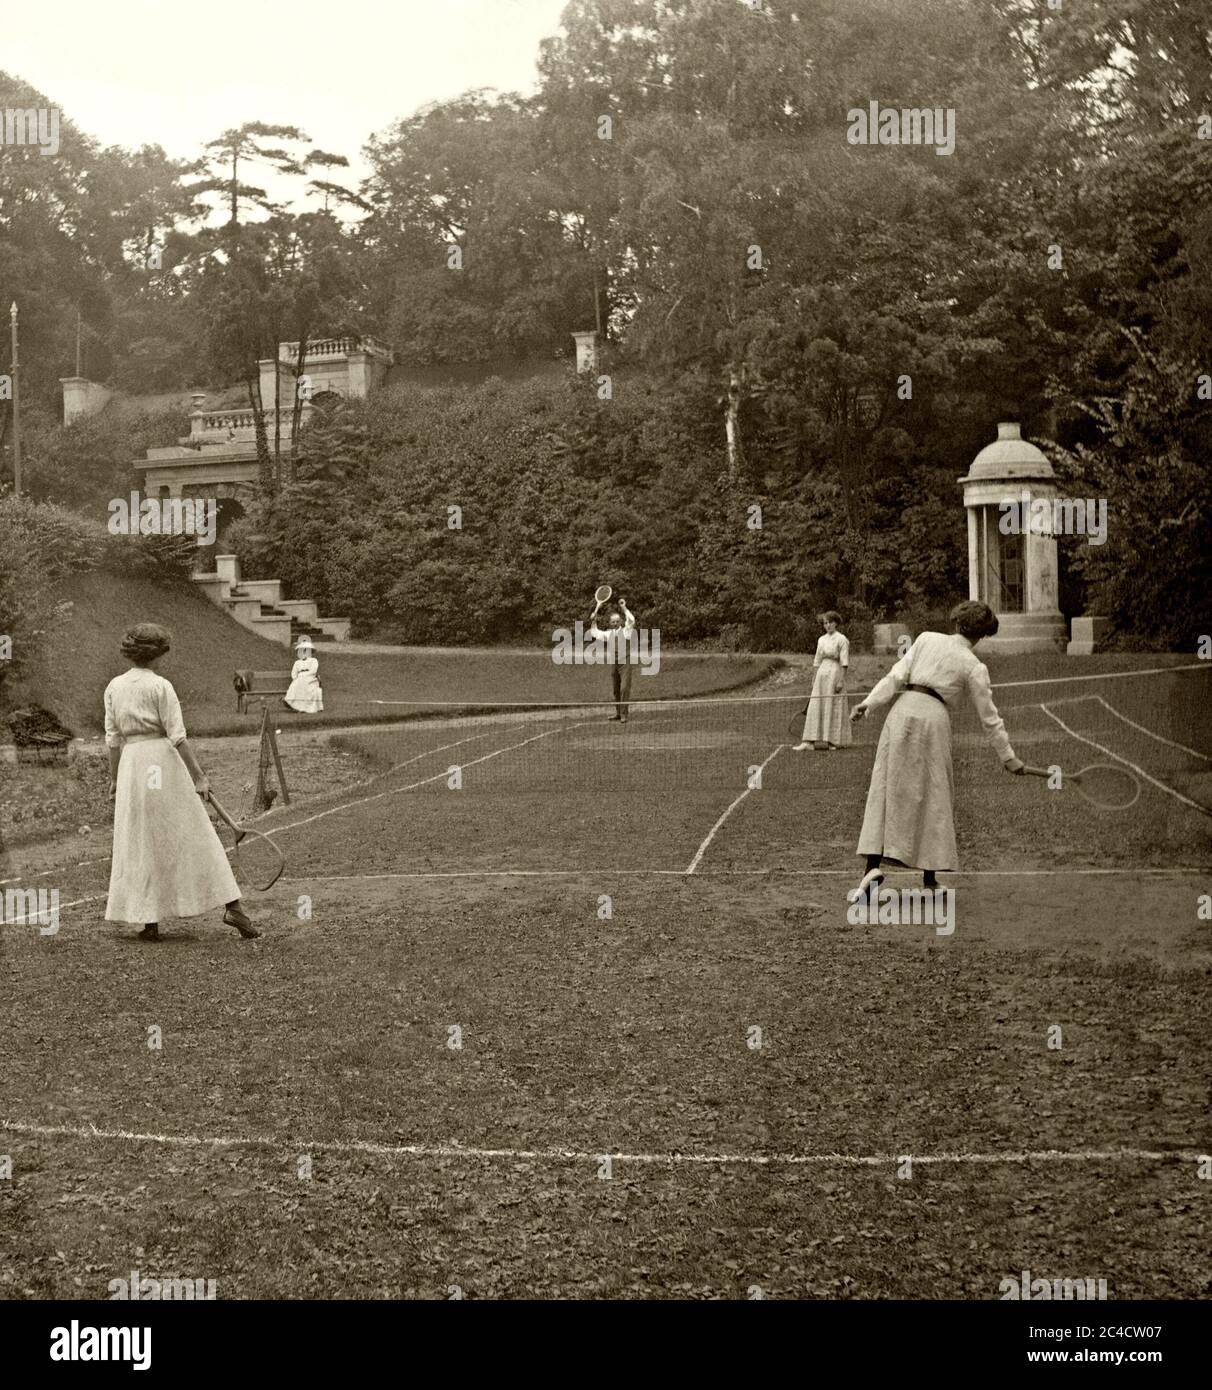 A genteel game of tennis in the UK c.1900 – one man and three ladies play in a country house/stately home garden on a very uneven grass court. The sport looks here seems like a pastime of the upper classes. Stock Photo